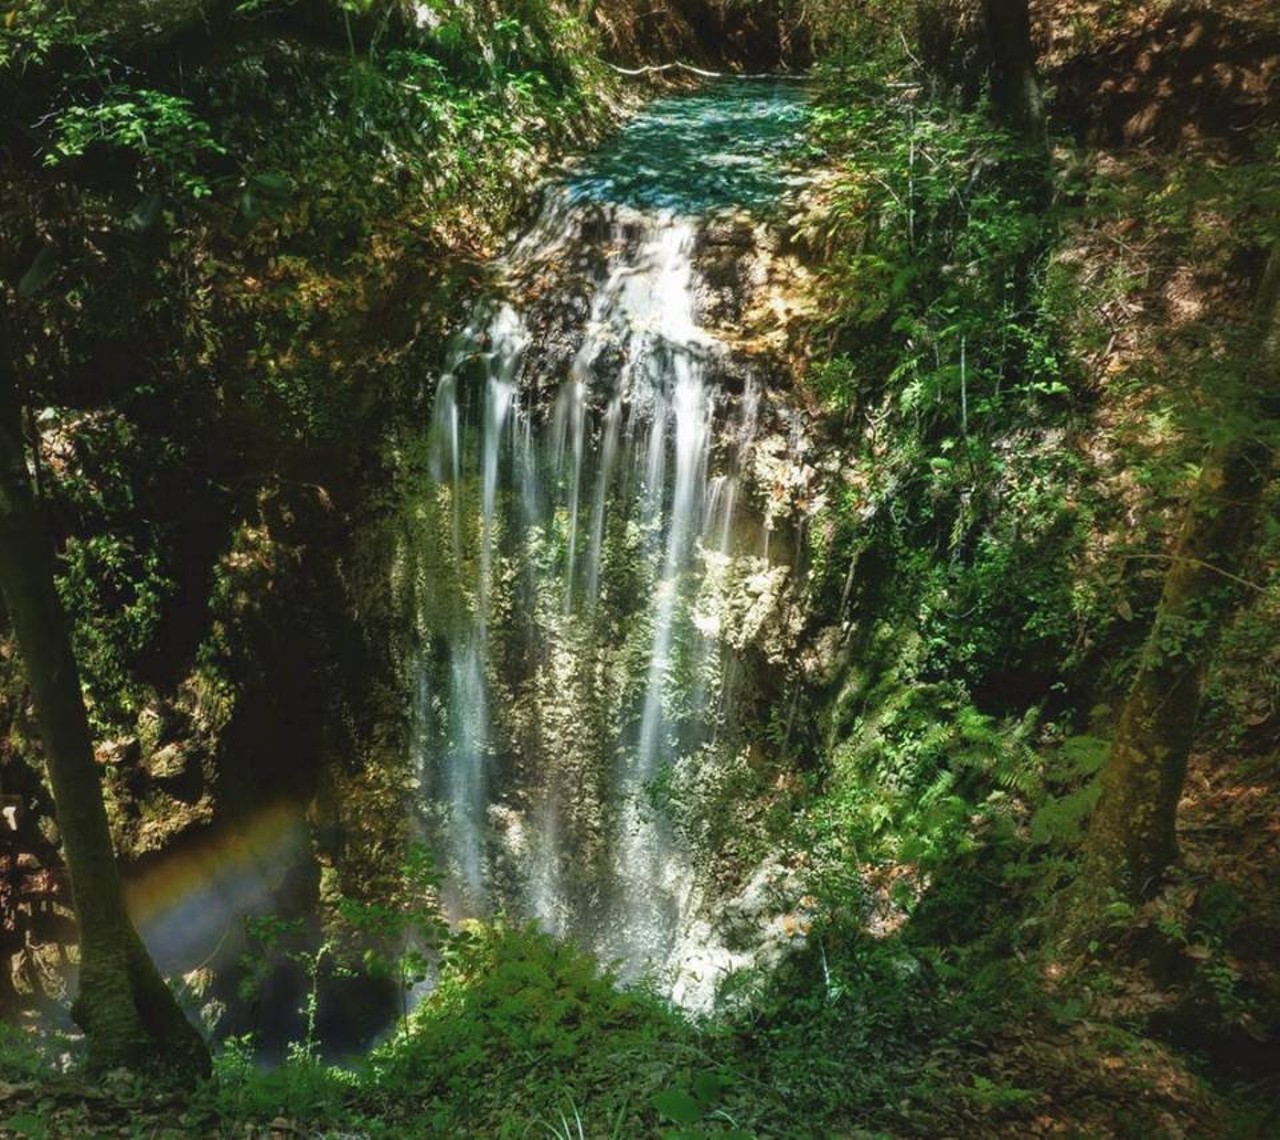 Falling Waters State Park
Distance from Orlando: 4 hours 45 minutes
Home to Florida&#146;s highest waterfall, this park has 24 campsites you can call temporary home. Aside from view the waterfall, those who camp here can visit interactive exhibits and view wildlife.
Photo via chris_explores/Instagram